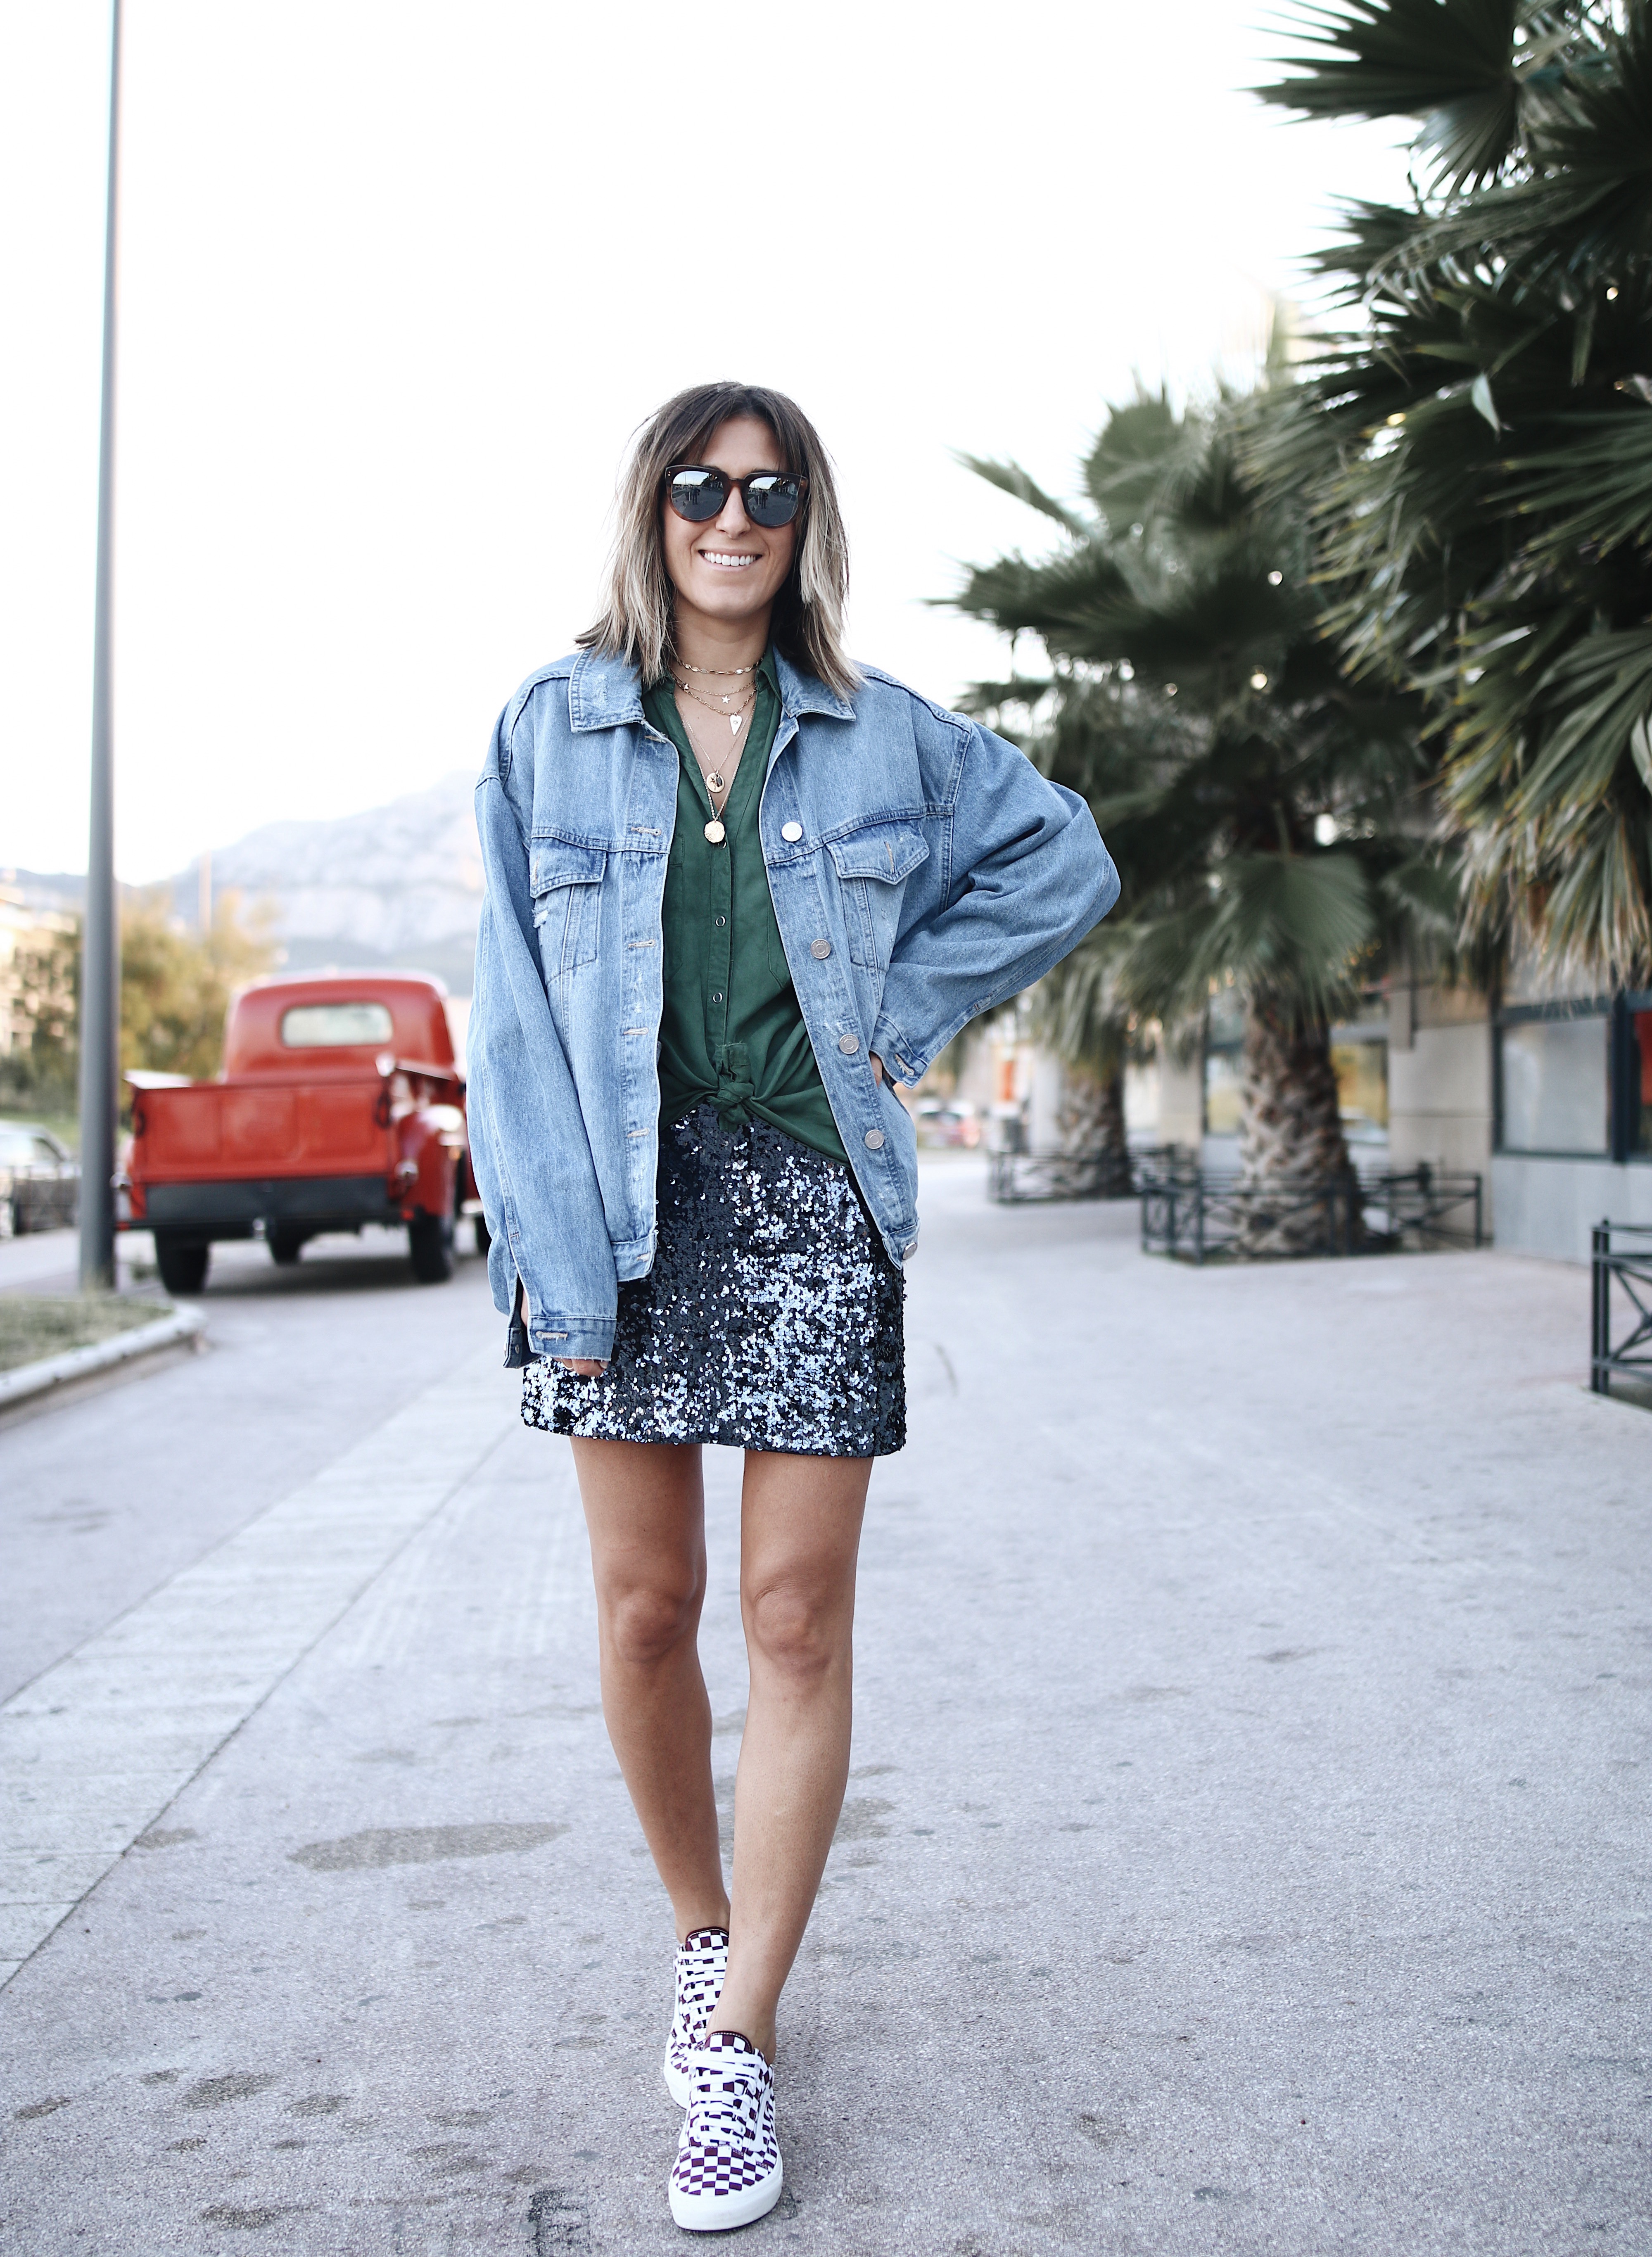 HOW TO STYLE SEQUIN SKIRT WITH DENIM JACKET AND VANS SNEAKERS